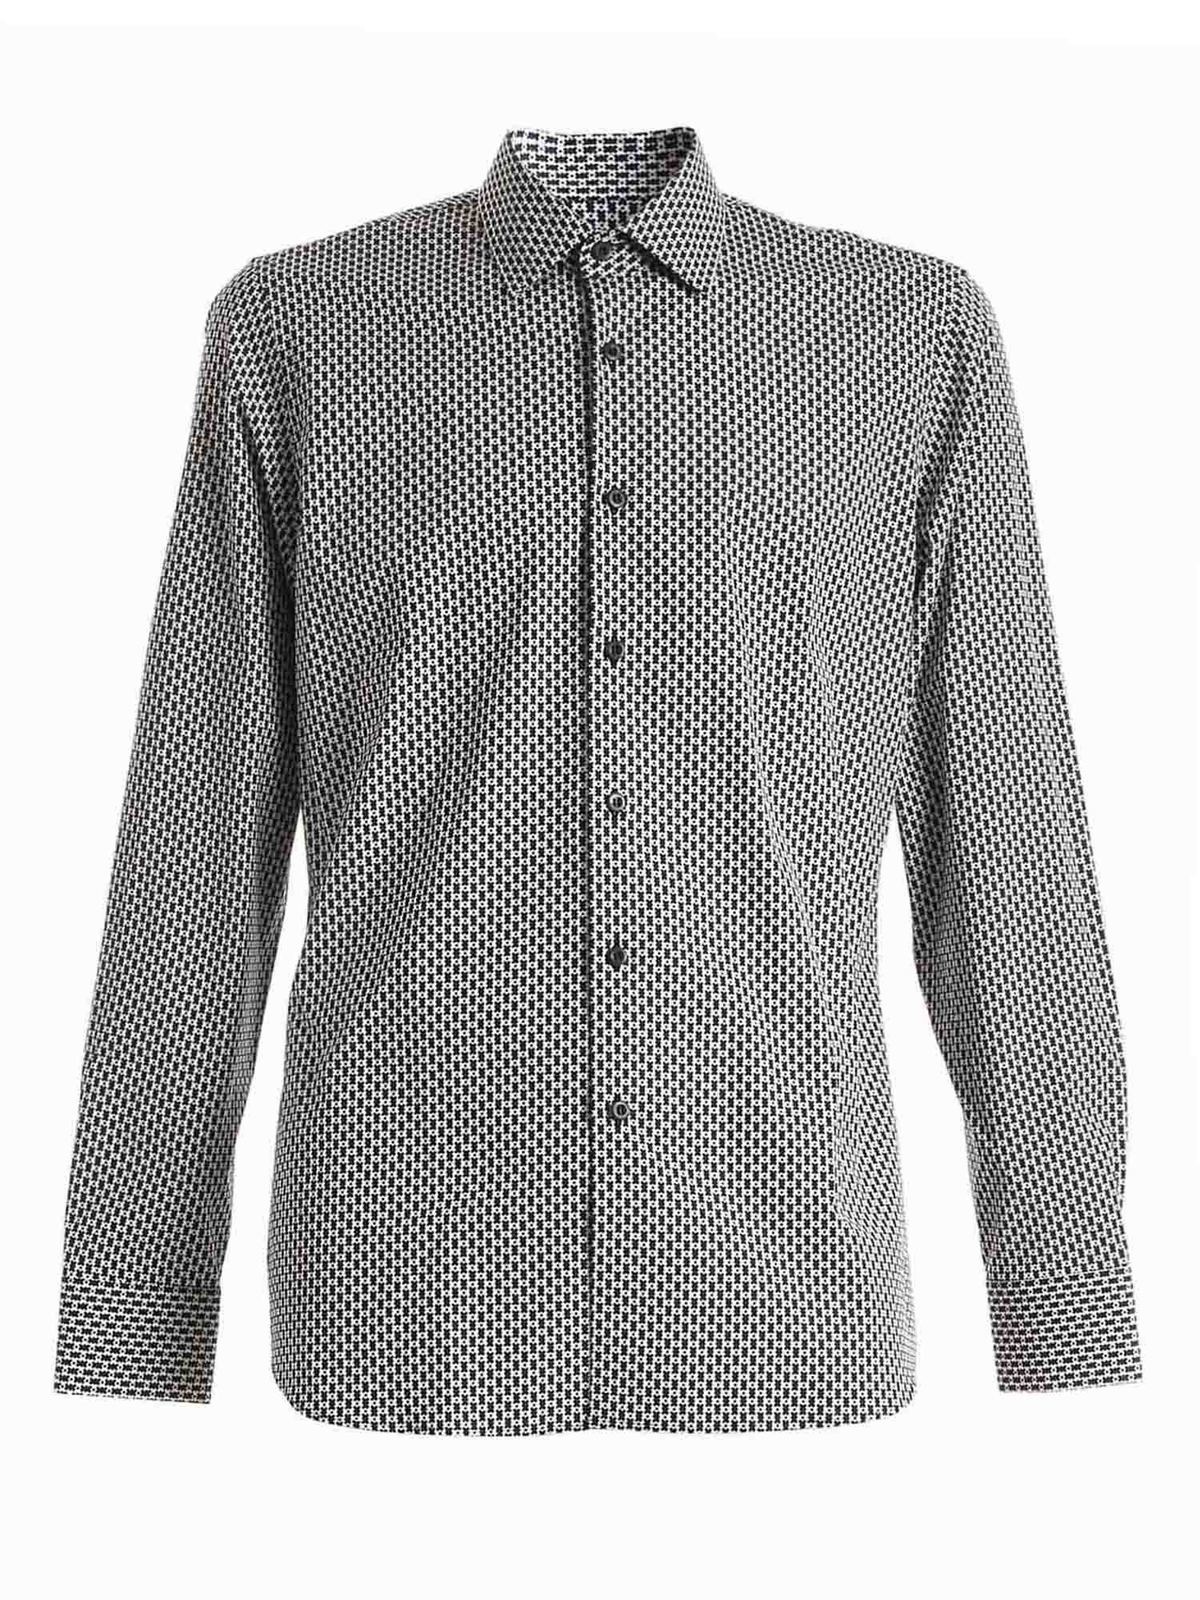 Shirts Prada - Shirt in white and black featuring pattern - UCM6081XBLF0002